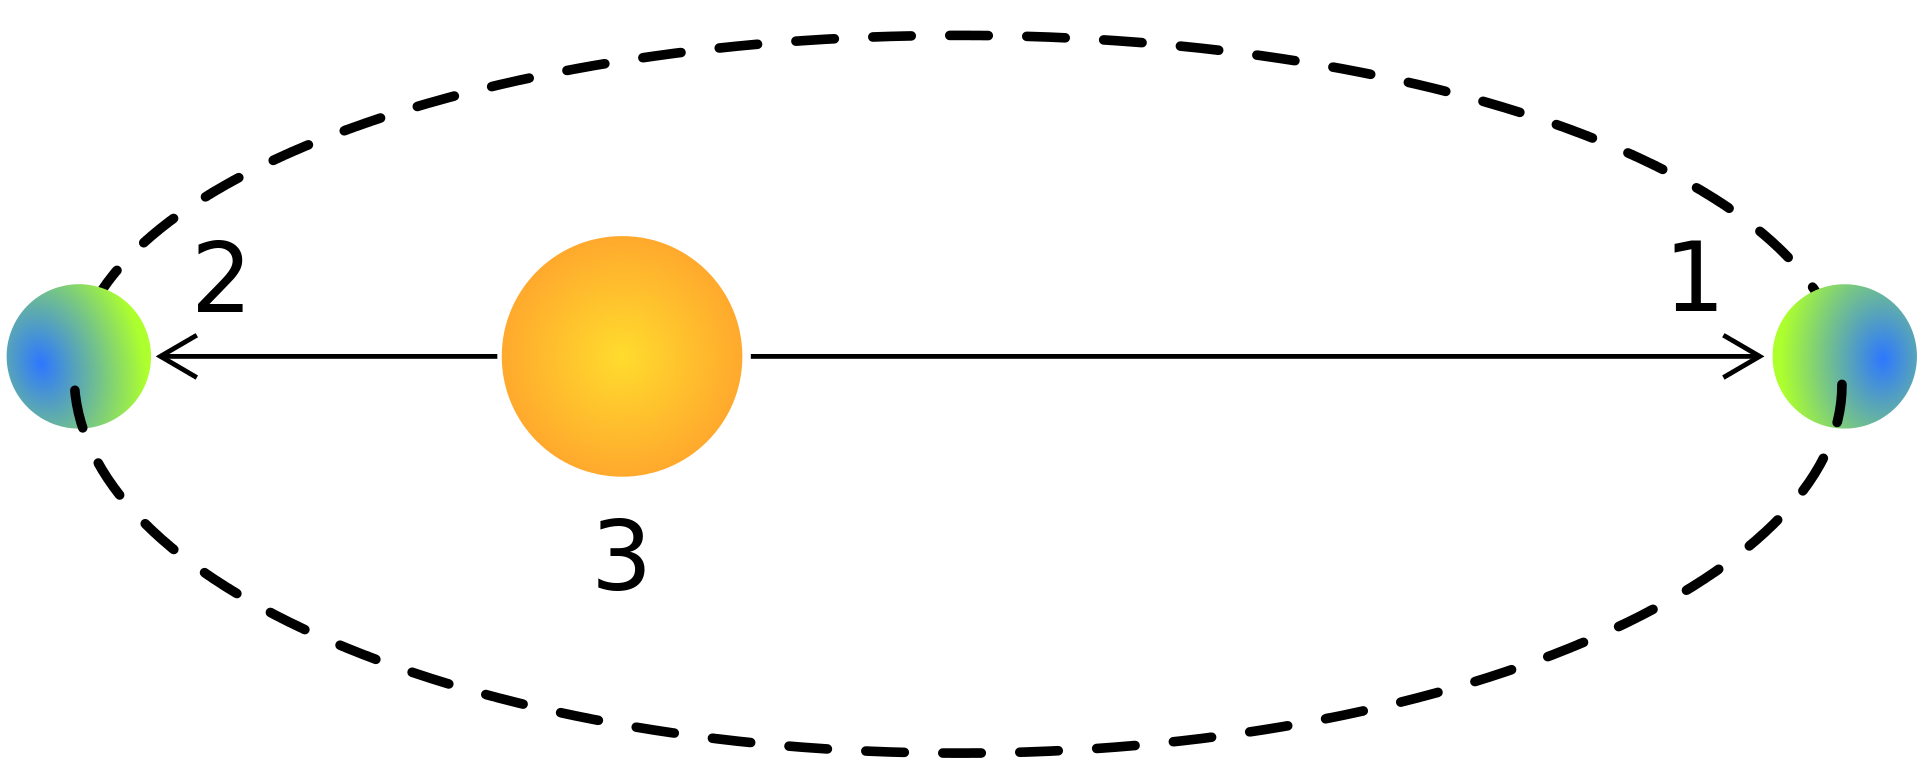 Aphelion_(PSF).svg.png